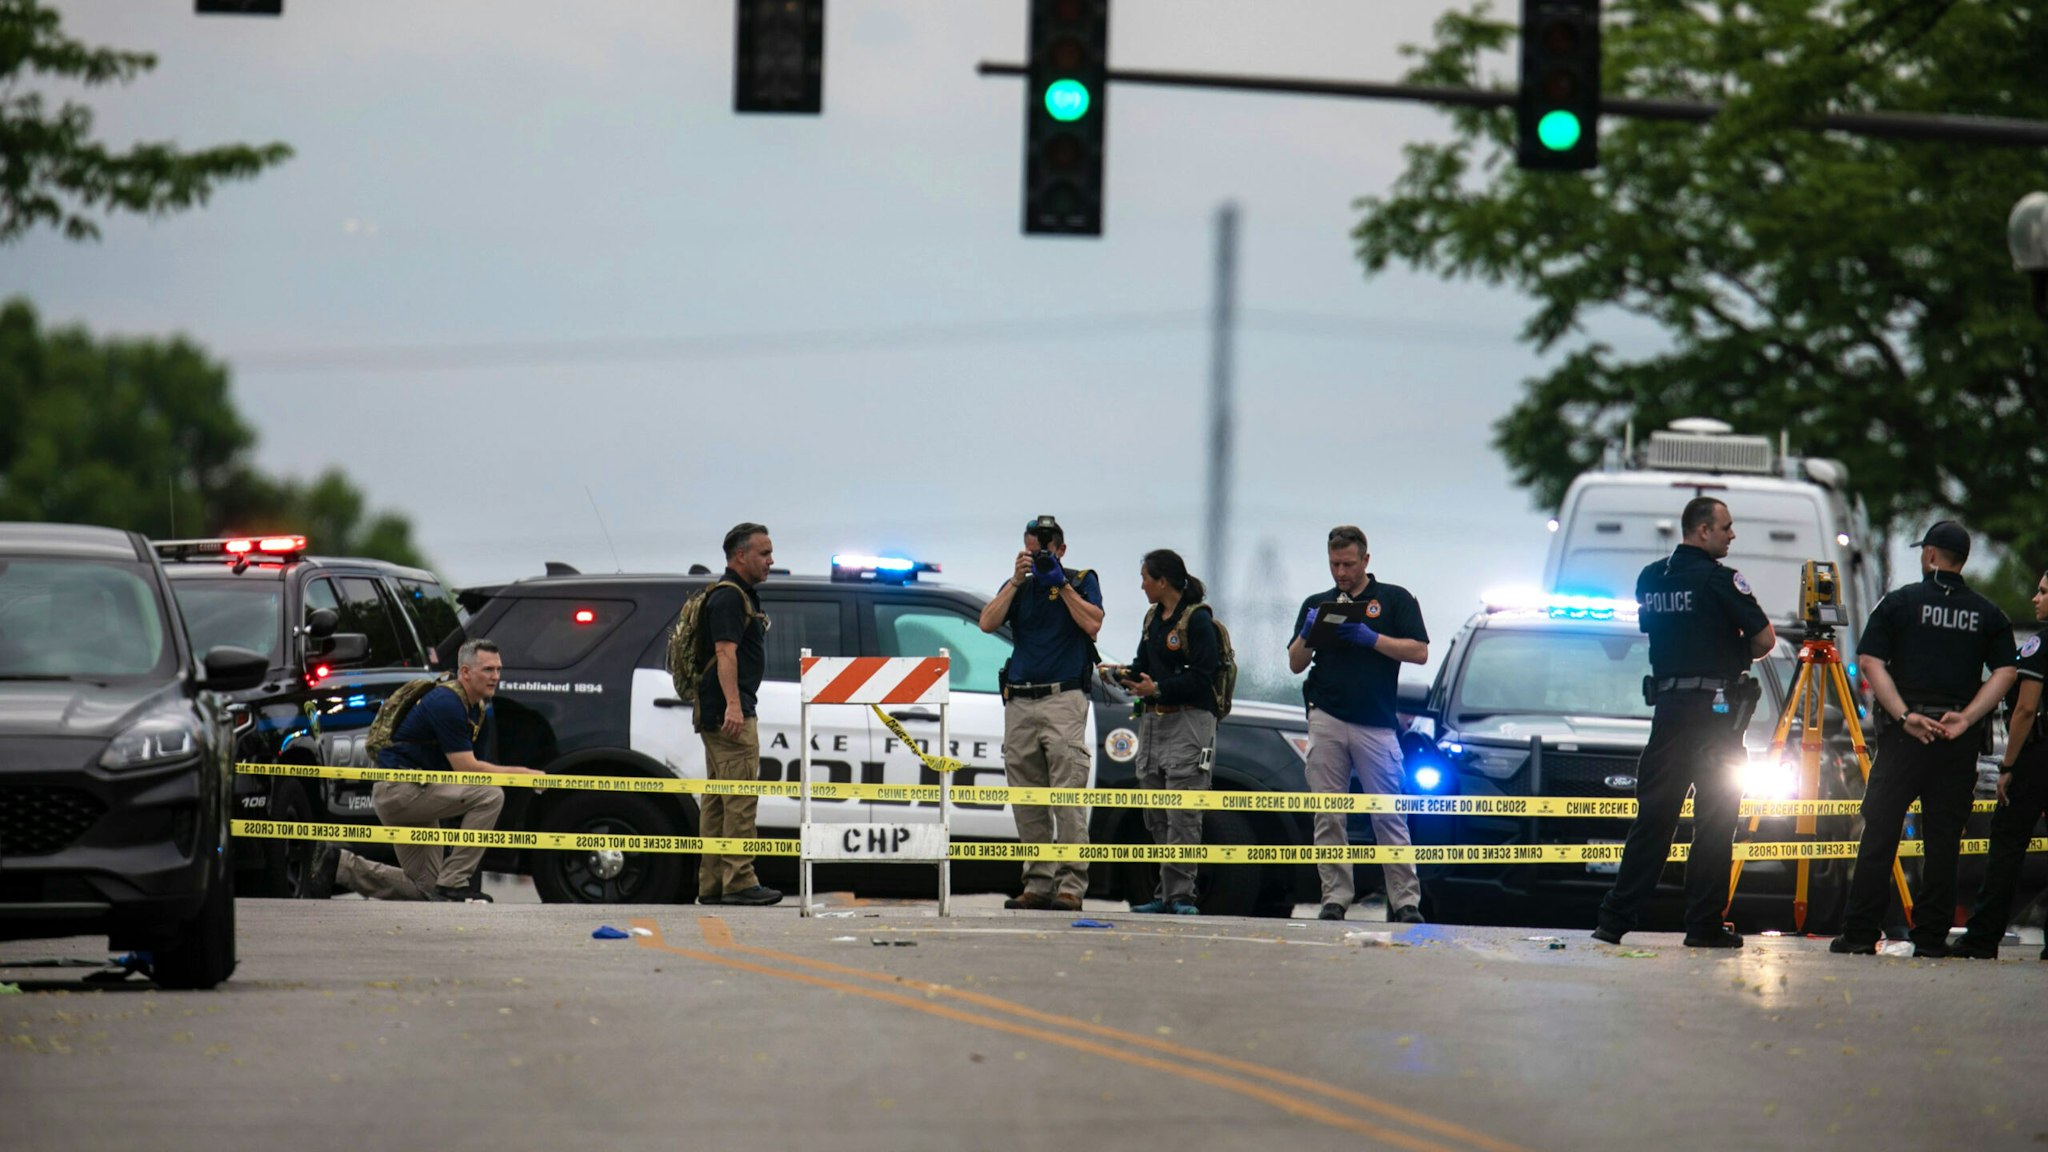 Police officers take photos and investigate at the scene of a mass shooting in Highland Park, Illinois, the United States, July 4, 2022. Six people have been confirmed killed in a mass shooting at an Independence Day parade Monday morning in Highland Park in the northern suburbs of Chicago, Illinois.